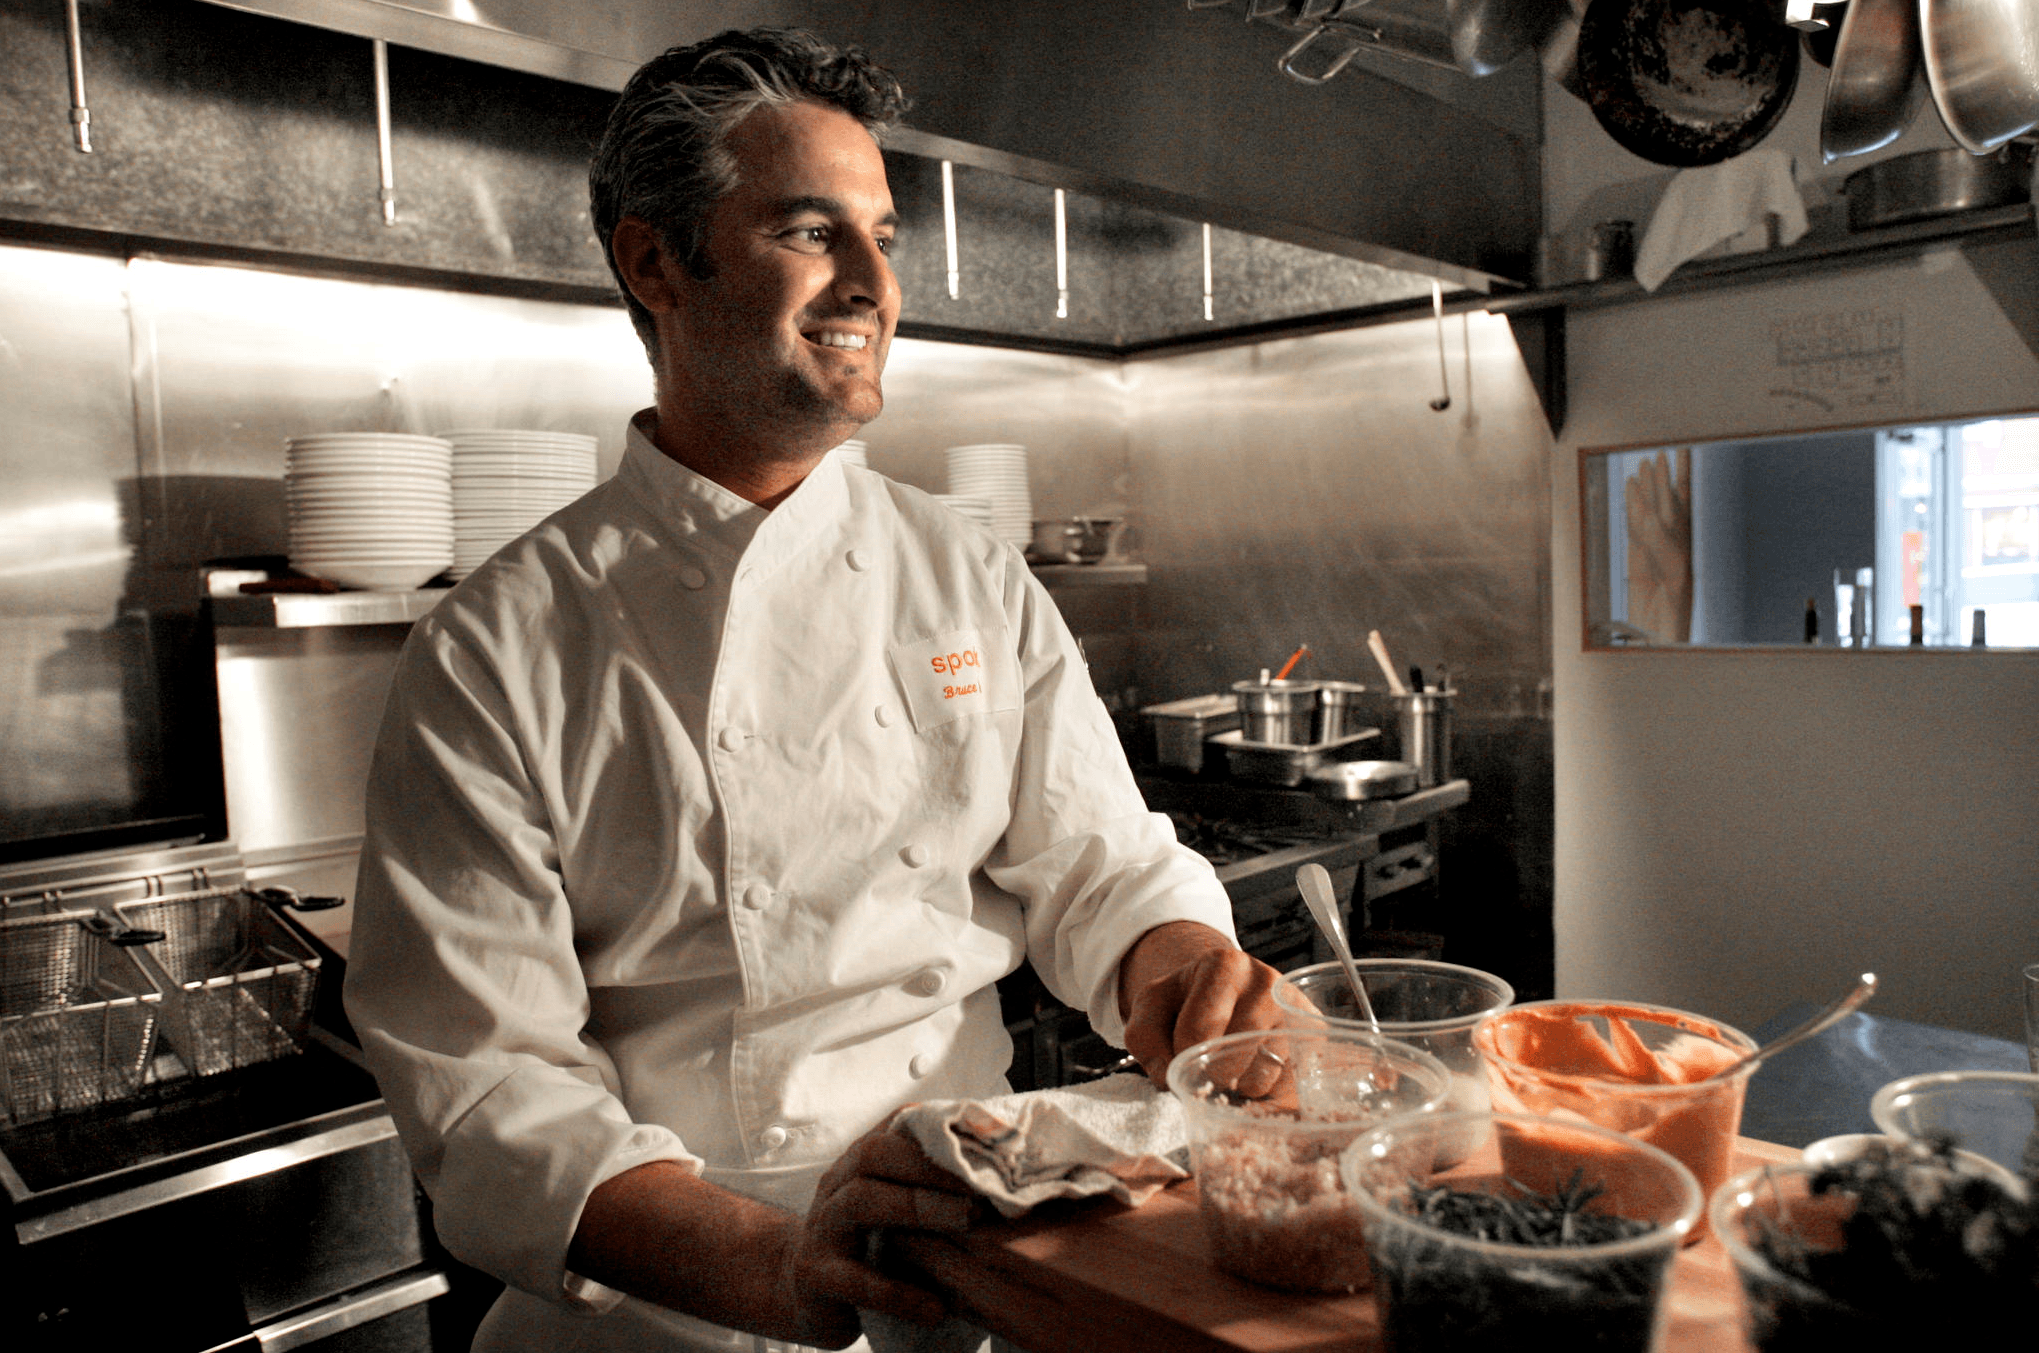 3 Things to Learn From Chefs Who Practice “Mise En Place”